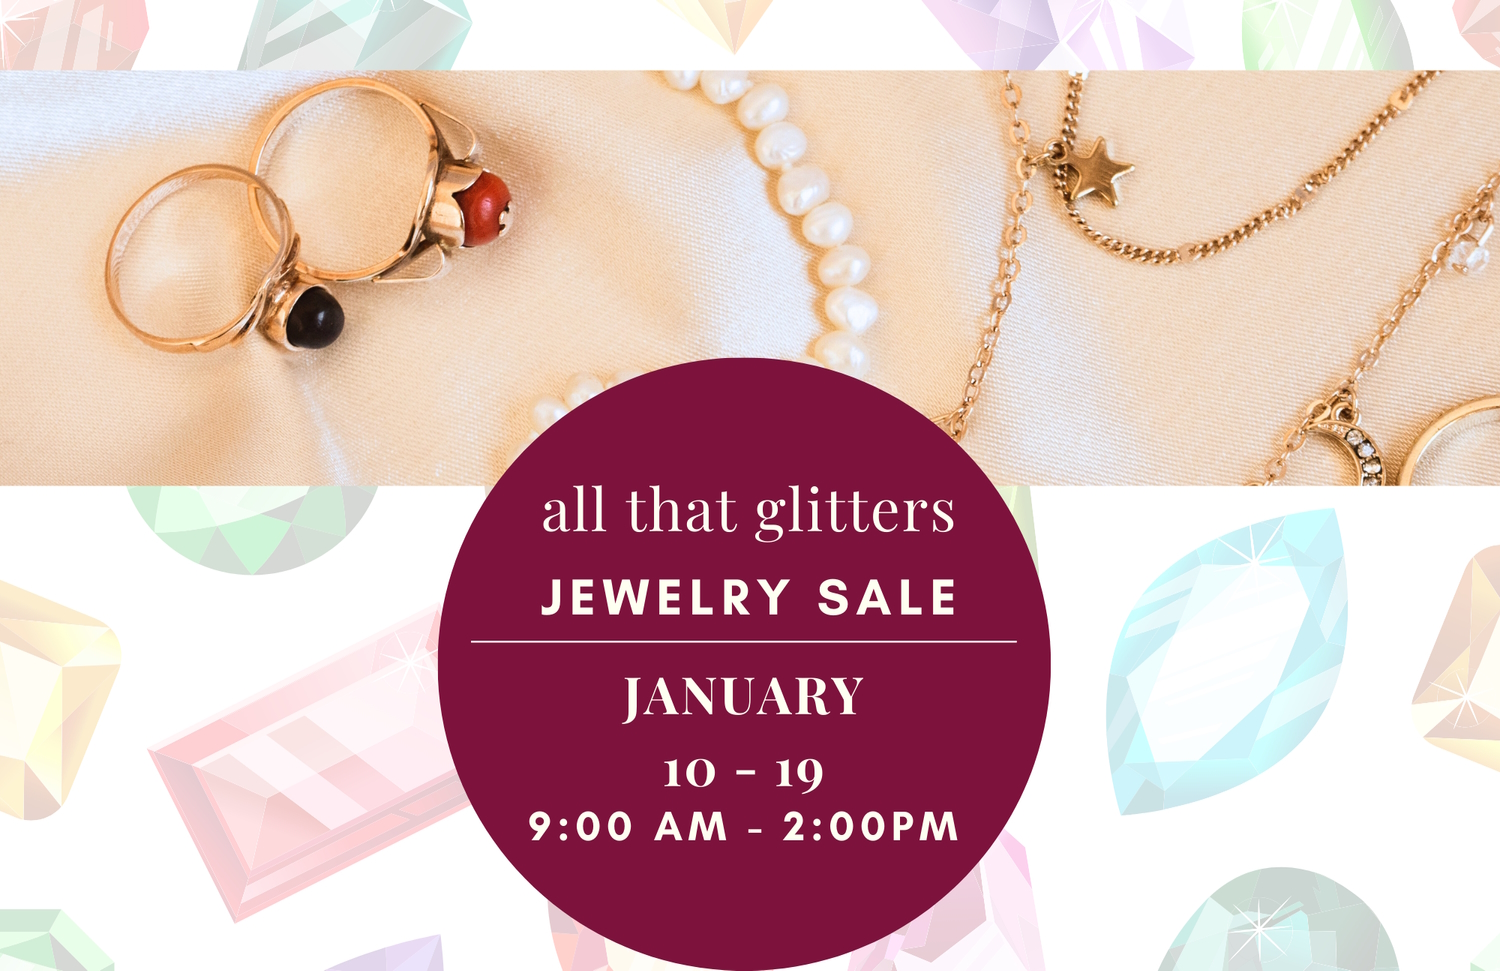 All That Glitters Jewelry Sale at Active Adult Centre of Mississauga